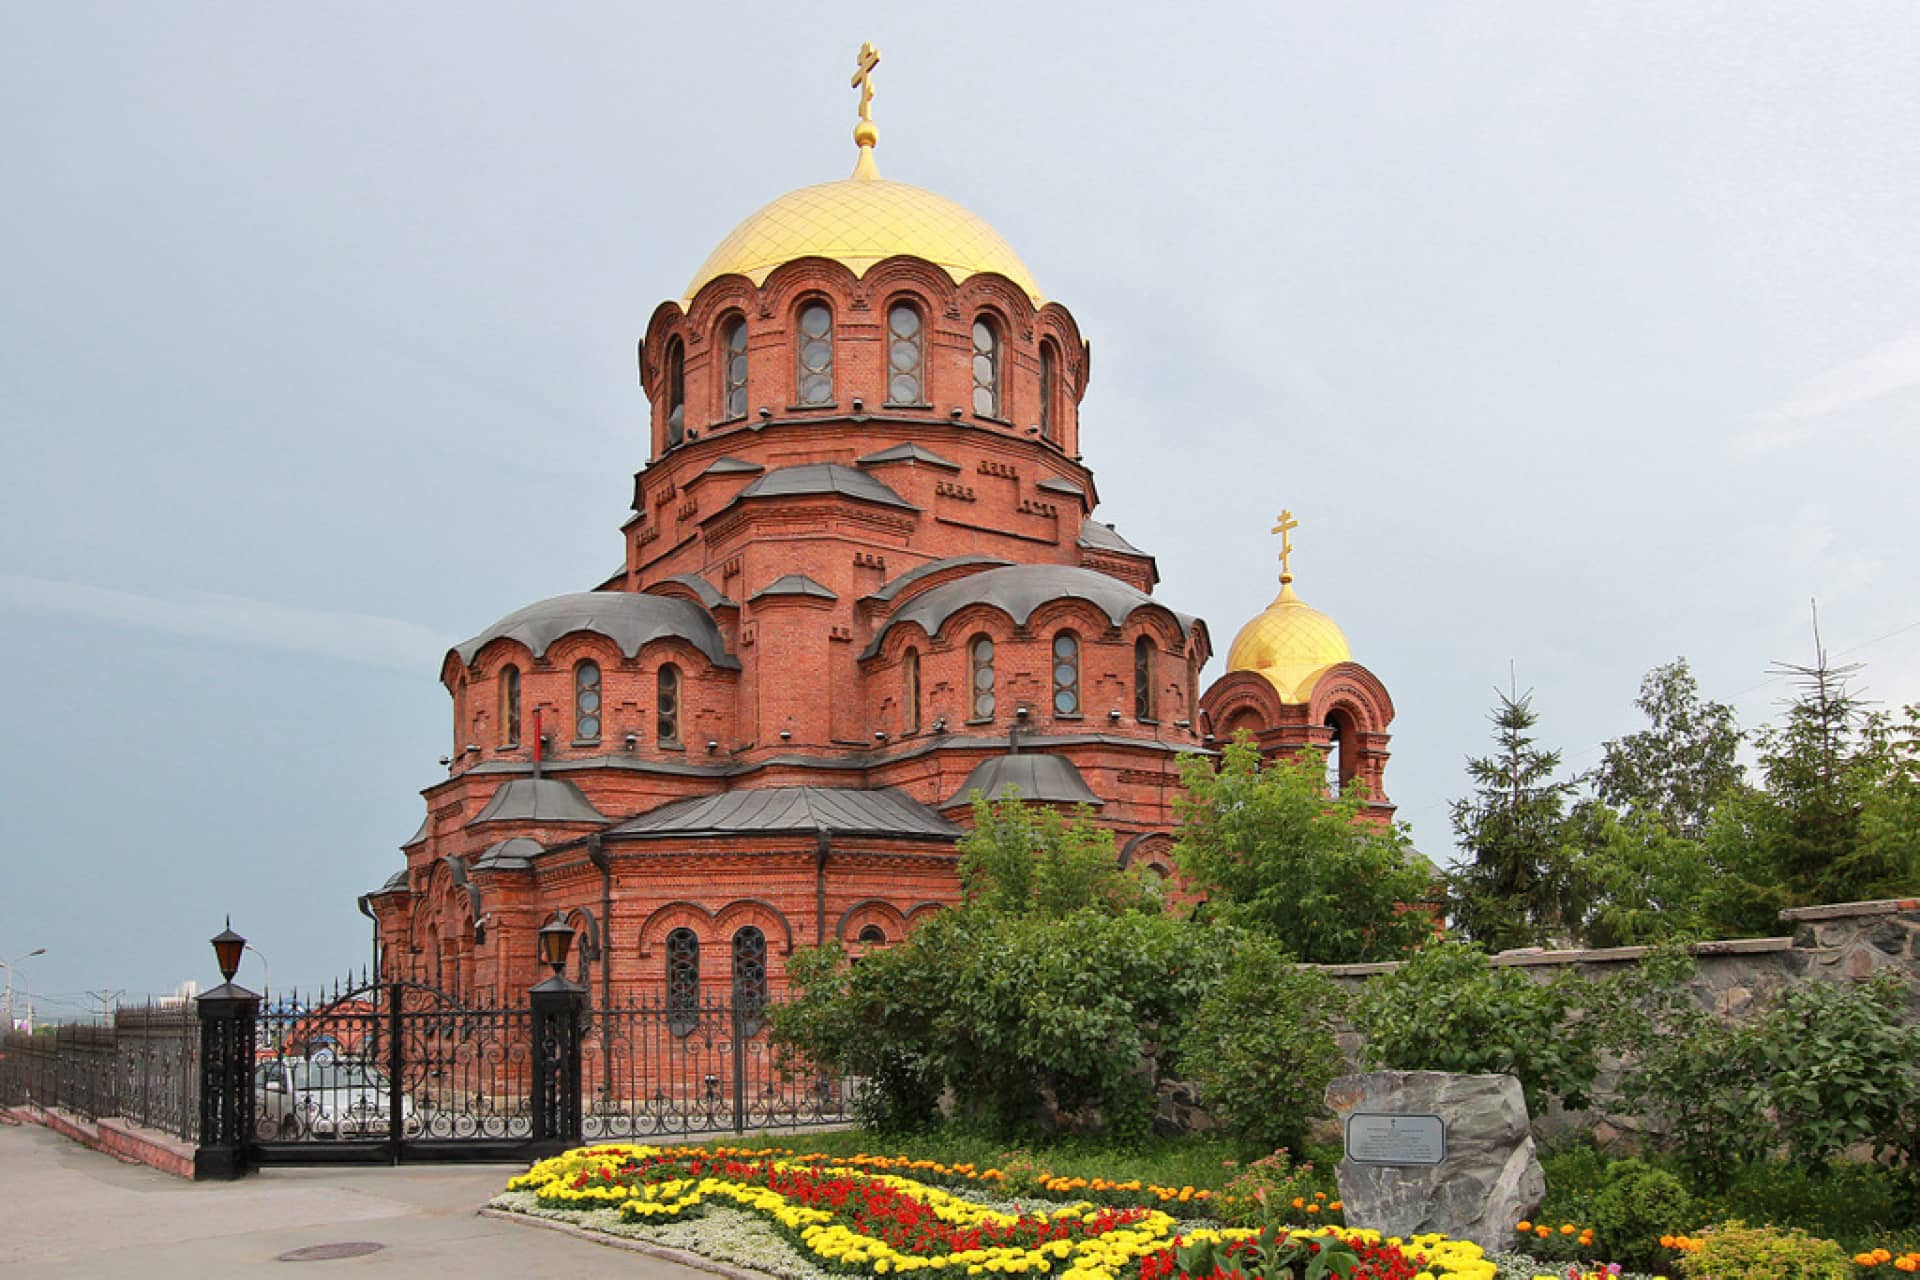 A massive orthodox cathedral of byzantine style made of red brick with gilded domes